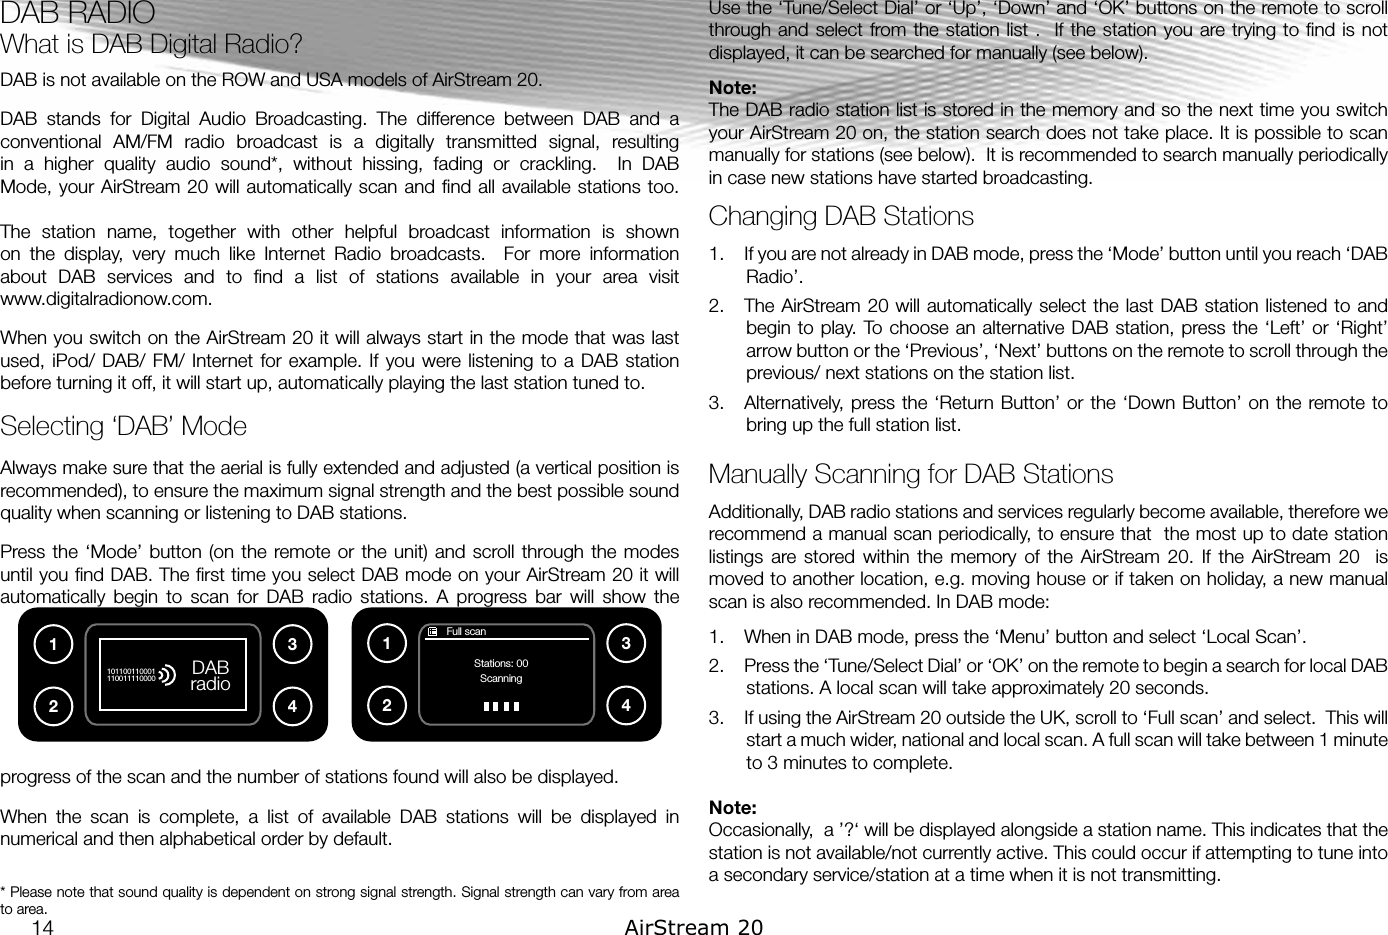 DAB RADIO  What is DAB Digital Radio?DAB is not available on the ROW and USA models of AirStream 20.DAB  stands  for  Digital  Audio  Broadcasting.  The  difference  between  DAB  and  a conventional  AM/FM  radio  broadcast  is  a  digitally  transmitted  signal,  resulting in  a  higher  quality  audio  sound*,  without  hissing,  fading  or  crackling.    In  DAB Mode, your AirStream 20 will automatically scan and  ﬁnd  all available  stations too. The  station  name,  together  with  other  helpful  broadcast  information  is  shown on  the  display,  very  much  like  Internet  Radio  broadcasts.    For  more  information about  DAB  services  and  to  ﬁnd  a  list  of  stations  available  in  your  area  visit  www.digitalradionow.com.When you switch on the AirStream 20 it will always start in the mode that was last used, iPod/  DAB/ FM/ Internet  for  example. If  you were listening to  a DAB station before turning it off, it will start up, automatically playing the last station tuned to.Selecting ‘DAB’ ModeAlways make sure that the aerial is fully extended and adjusted (a vertical position is recommended), to ensure the maximum signal strength and the best possible sound quality when scanning or listening to DAB stations.Press the ‘Mode’  button (on the  remote or  the unit)  and scroll through the modes until you ﬁnd DAB. The ﬁrst time you select DAB mode on your AirStream 20 it will automatically  begin  to  scan  for  DAB  radio  stations.  A  progress  bar  will  show  the progress of the scan and the number of stations found will also be displayed. When  the  scan  is  complete,  a  list  of  available  DAB  stations  will  be  displayed  in numerical and then alphabetical order by default.* Please note that sound quality is dependent on strong signal strength. Signal strength can vary from area to area.  Use the ‘Tune/Select Dial’ or ‘Up’, ‘Down’ and ‘OK’ buttons on the remote to scroll through and select  from the station list  .   If  the station  you  are  trying to  ﬁnd  is not displayed, it can be searched for manually (see below).Note: The DAB radio station list is stored in the memory and so the next time you switch your AirStream 20 on, the station search does not take place. It is possible to scan manually for stations (see below).  It is recommended to search manually periodically in case new stations have started broadcasting.Changing DAB Stations1.  If you are not already in DAB mode, press the ‘Mode’ button until you reach ‘DAB Radio’.2.  The AirStream 20  will  automatically select the  last  DAB station listened  to and begin to play. To choose an alternative DAB station, press the ‘Left’ or ‘Right’ arrow button or the ‘Previous’, ‘Next’ buttons on the remote to scroll through the previous/ next stations on the station list.3.  Alternatively,  press the ‘Return Button’ or the ‘Down Button’ on the remote to bring up the full station list.Manually Scanning for DAB StationsAdditionally, DAB radio stations and services regularly become available, therefore we recommend a manual scan periodically, to ensure that  the most up to date station listings  are  stored  within  the  memory  of  the  AirStream  20.  If  the  AirStream  20    is moved to another location, e.g. moving house or if taken on holiday, a new manual scan is also recommended. In DAB mode:1.  When in DAB mode, press the ‘Menu’ button and select ‘Local Scan’.2.  Press the ‘Tune/Select Dial’ or ‘OK’ on the remote to begin a search for local DAB stations. A local scan will take approximately 20 seconds.3.  If using the AirStream 20 outside the UK, scroll to ‘Full scan’ and select.  This will start a much wider, national and local scan. A full scan will take between 1 minute to 3 minutes to complete.Note: Occasionally,  a ’?‘ will be displayed alongside a station name. This indicates that the station is not available/not currently active. This could occur if attempting to tune into a secondary service/station at a time when it is not transmitting.DAB radio1011001100011100111100001234       Full scanStations: 00Scanning123414 AirStream 20